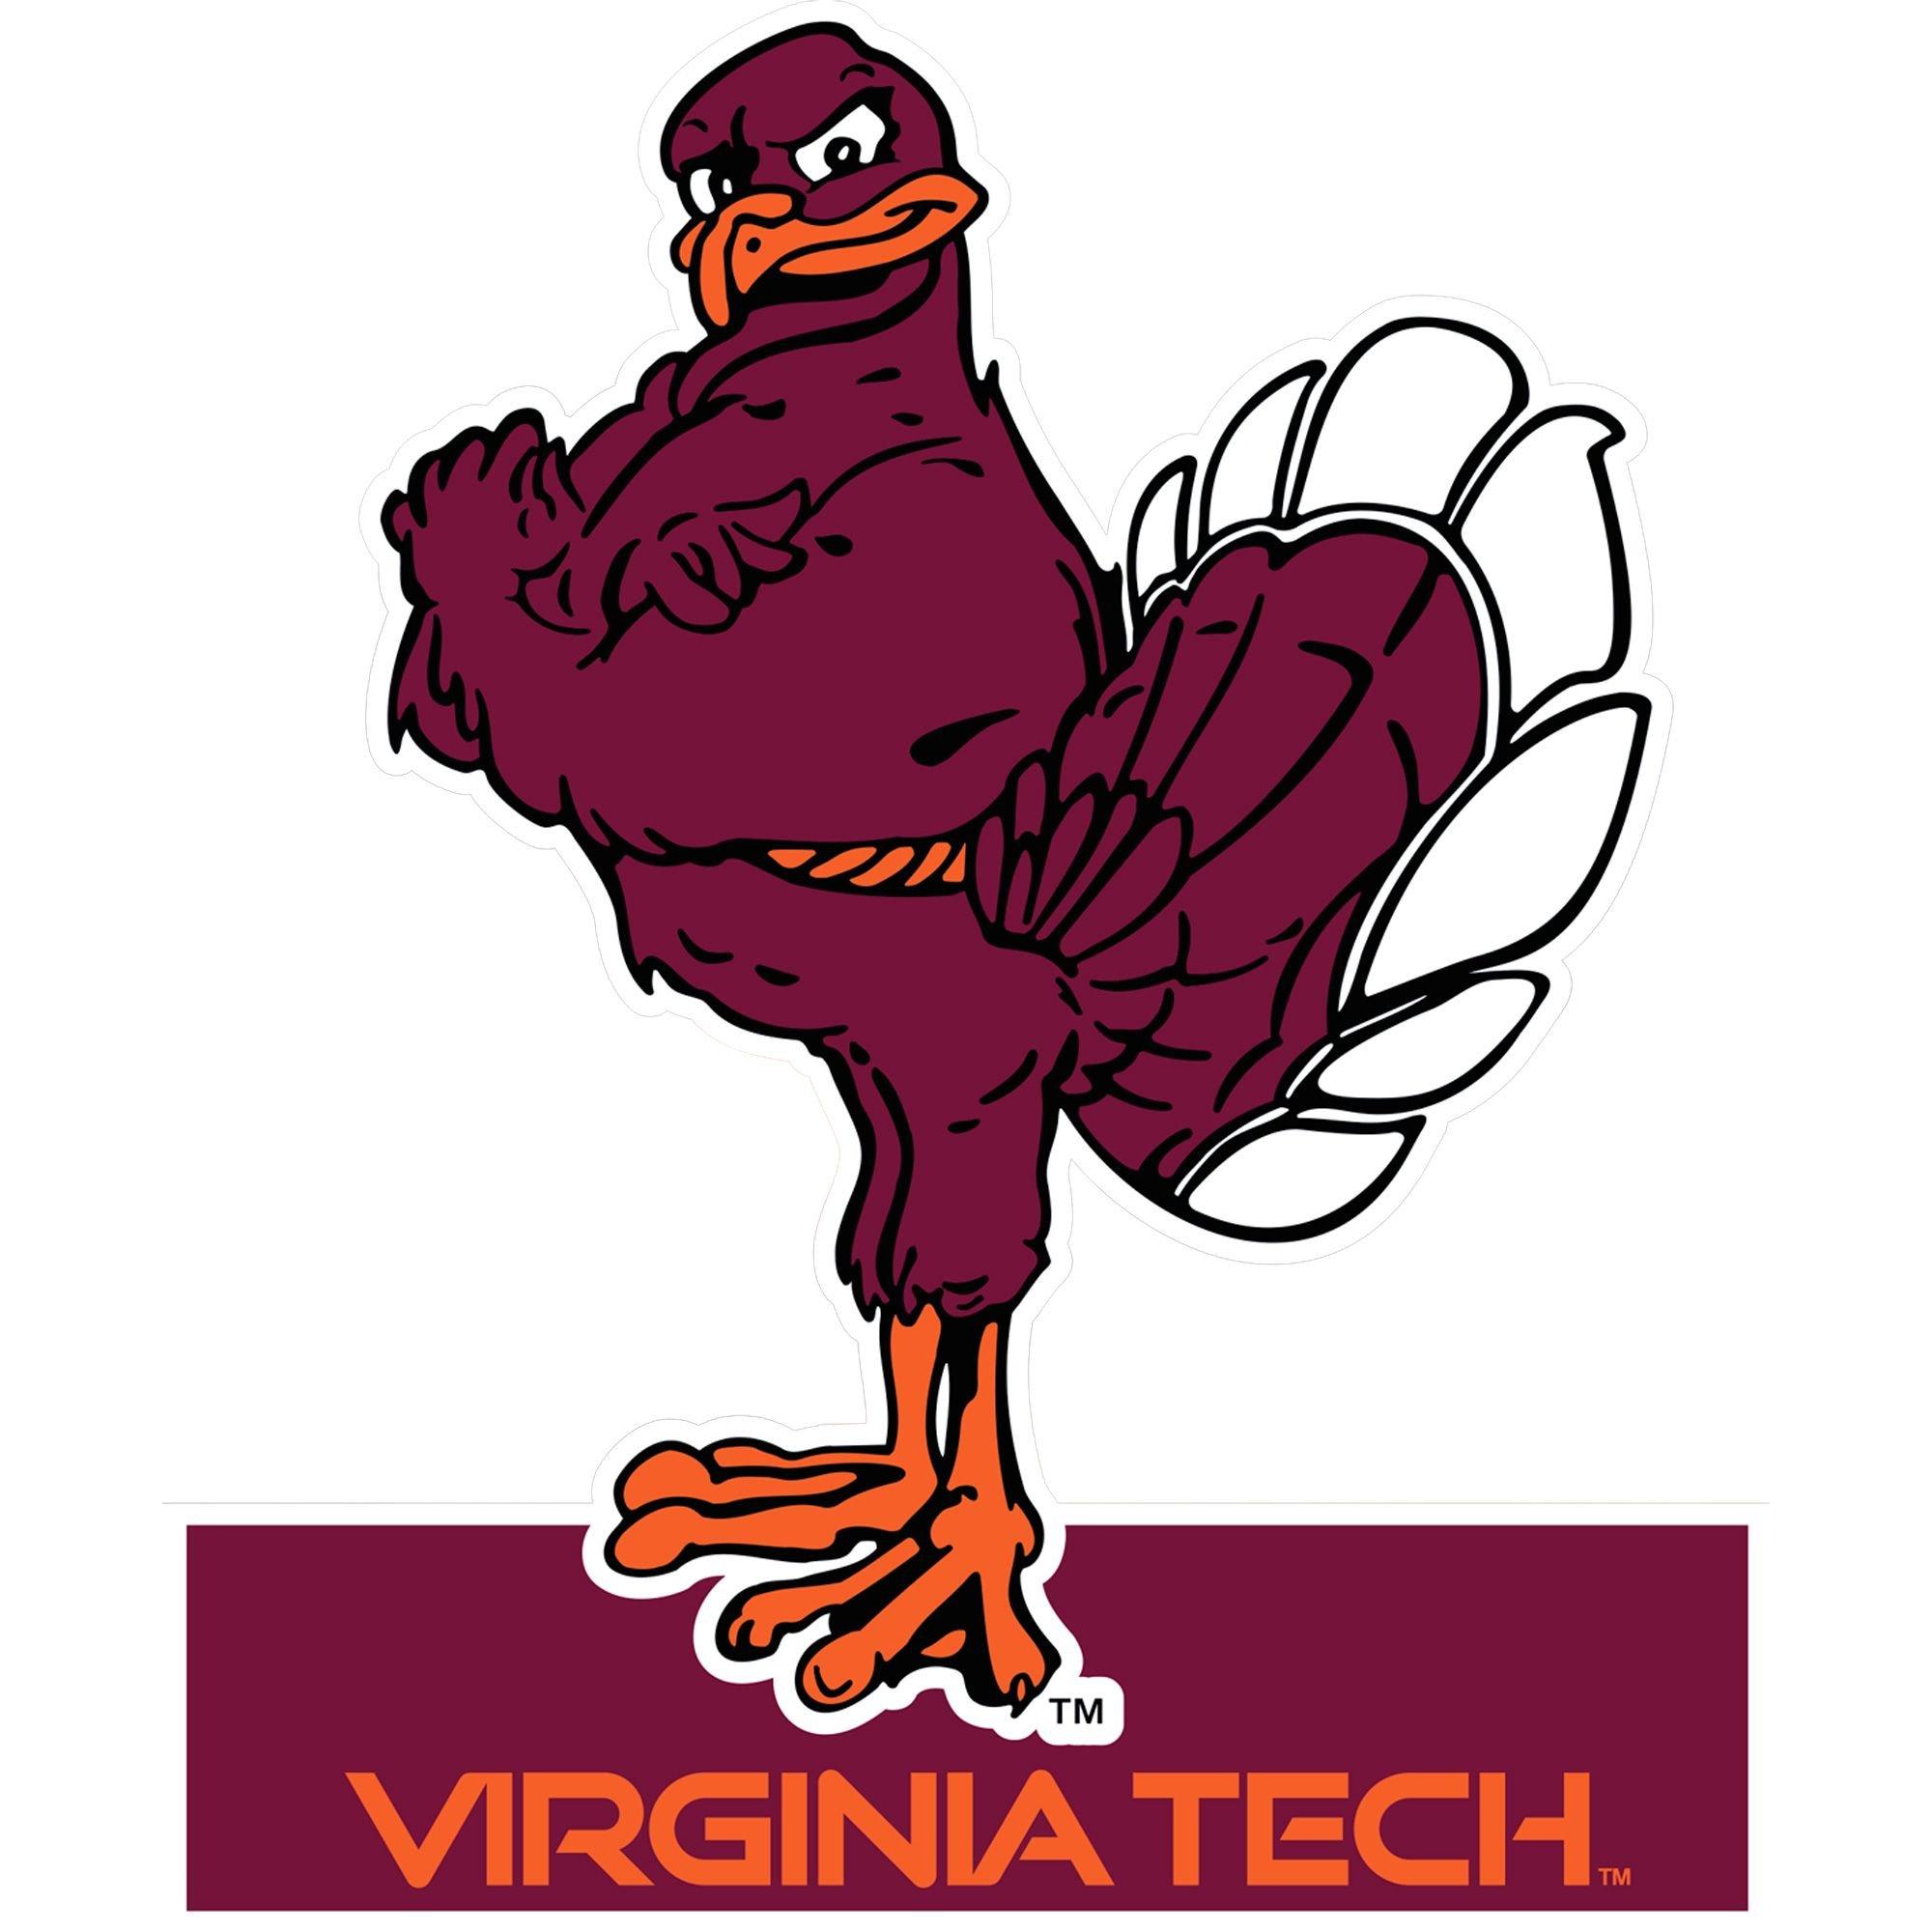 What is a hokie? Virginia Tech mascot, explained - Sports Illustrated